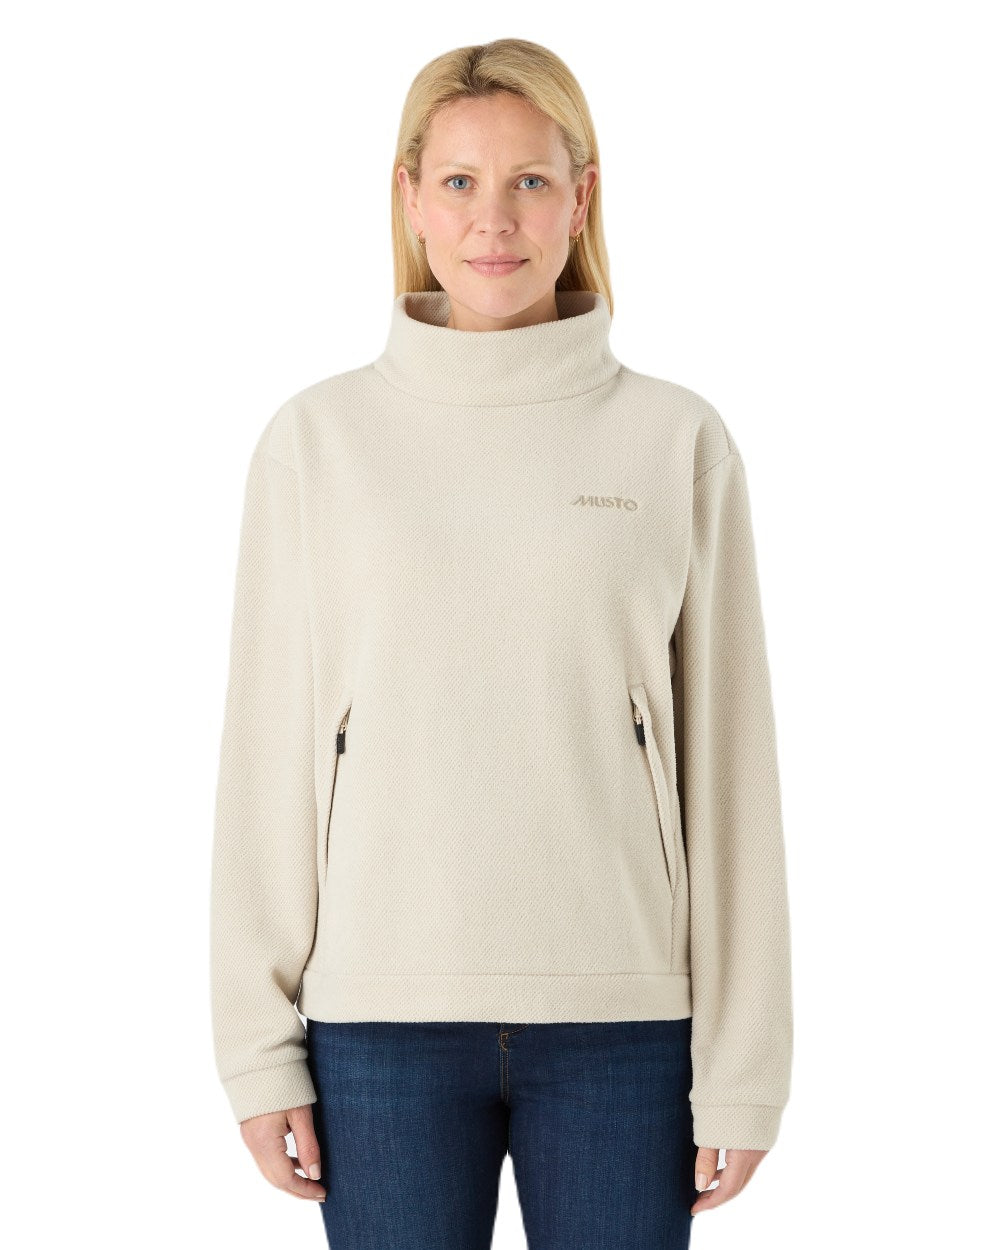 Pumice Coloured Musto Womens Classic Fleece Pullover On A White Background 